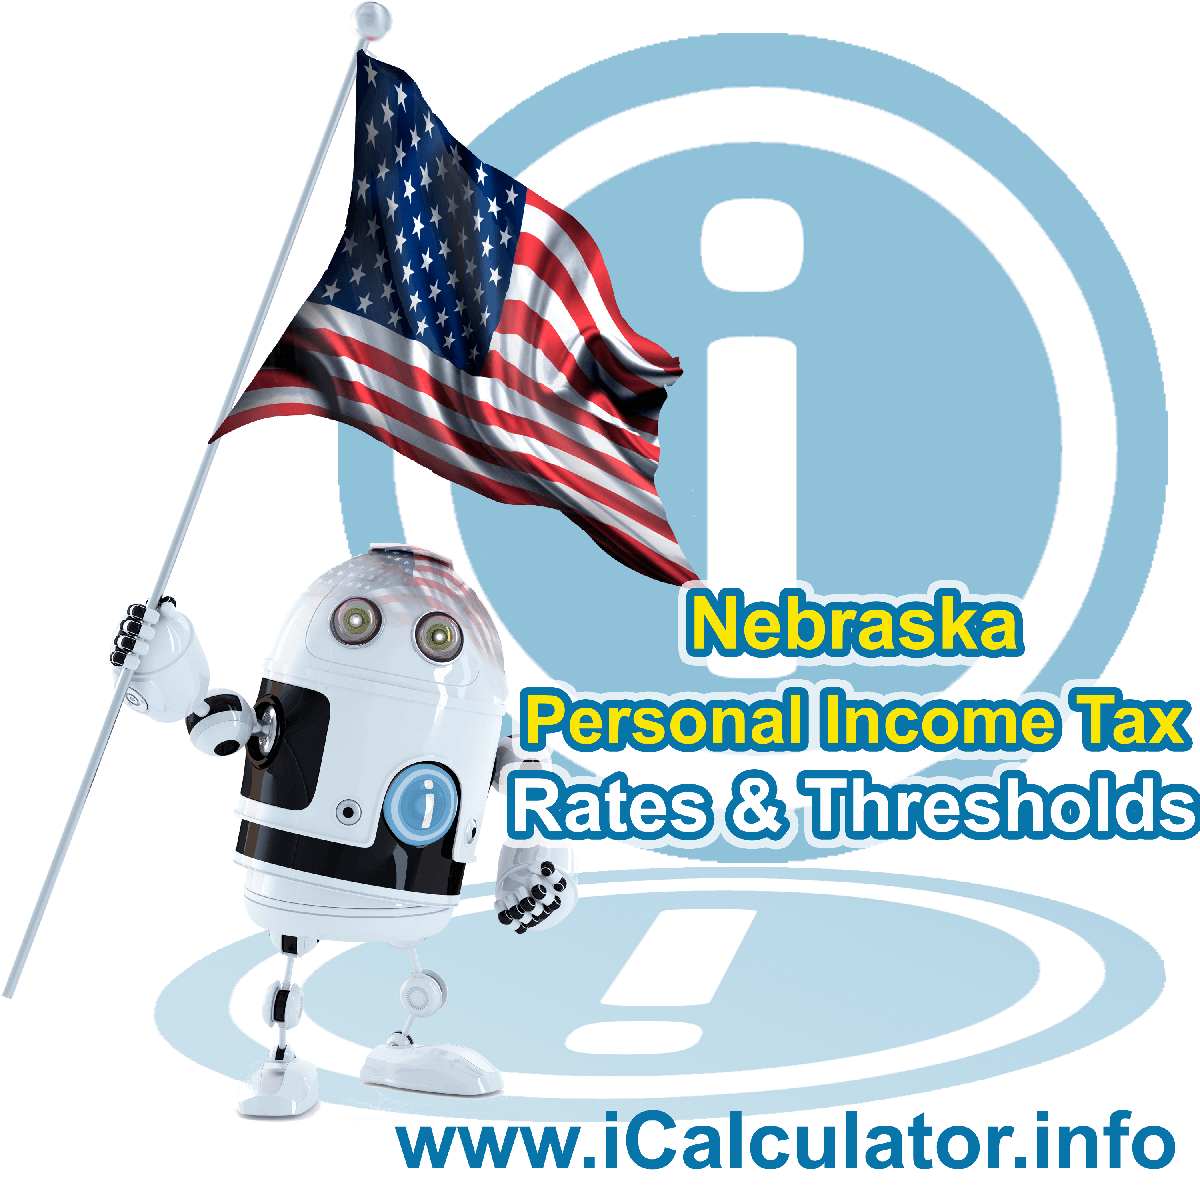 Nebraska State Tax Tables 2023. This image displays details of the Nebraska State Tax Tables for the 2023 tax return year which is provided in support of the 2023 US Tax Calculator